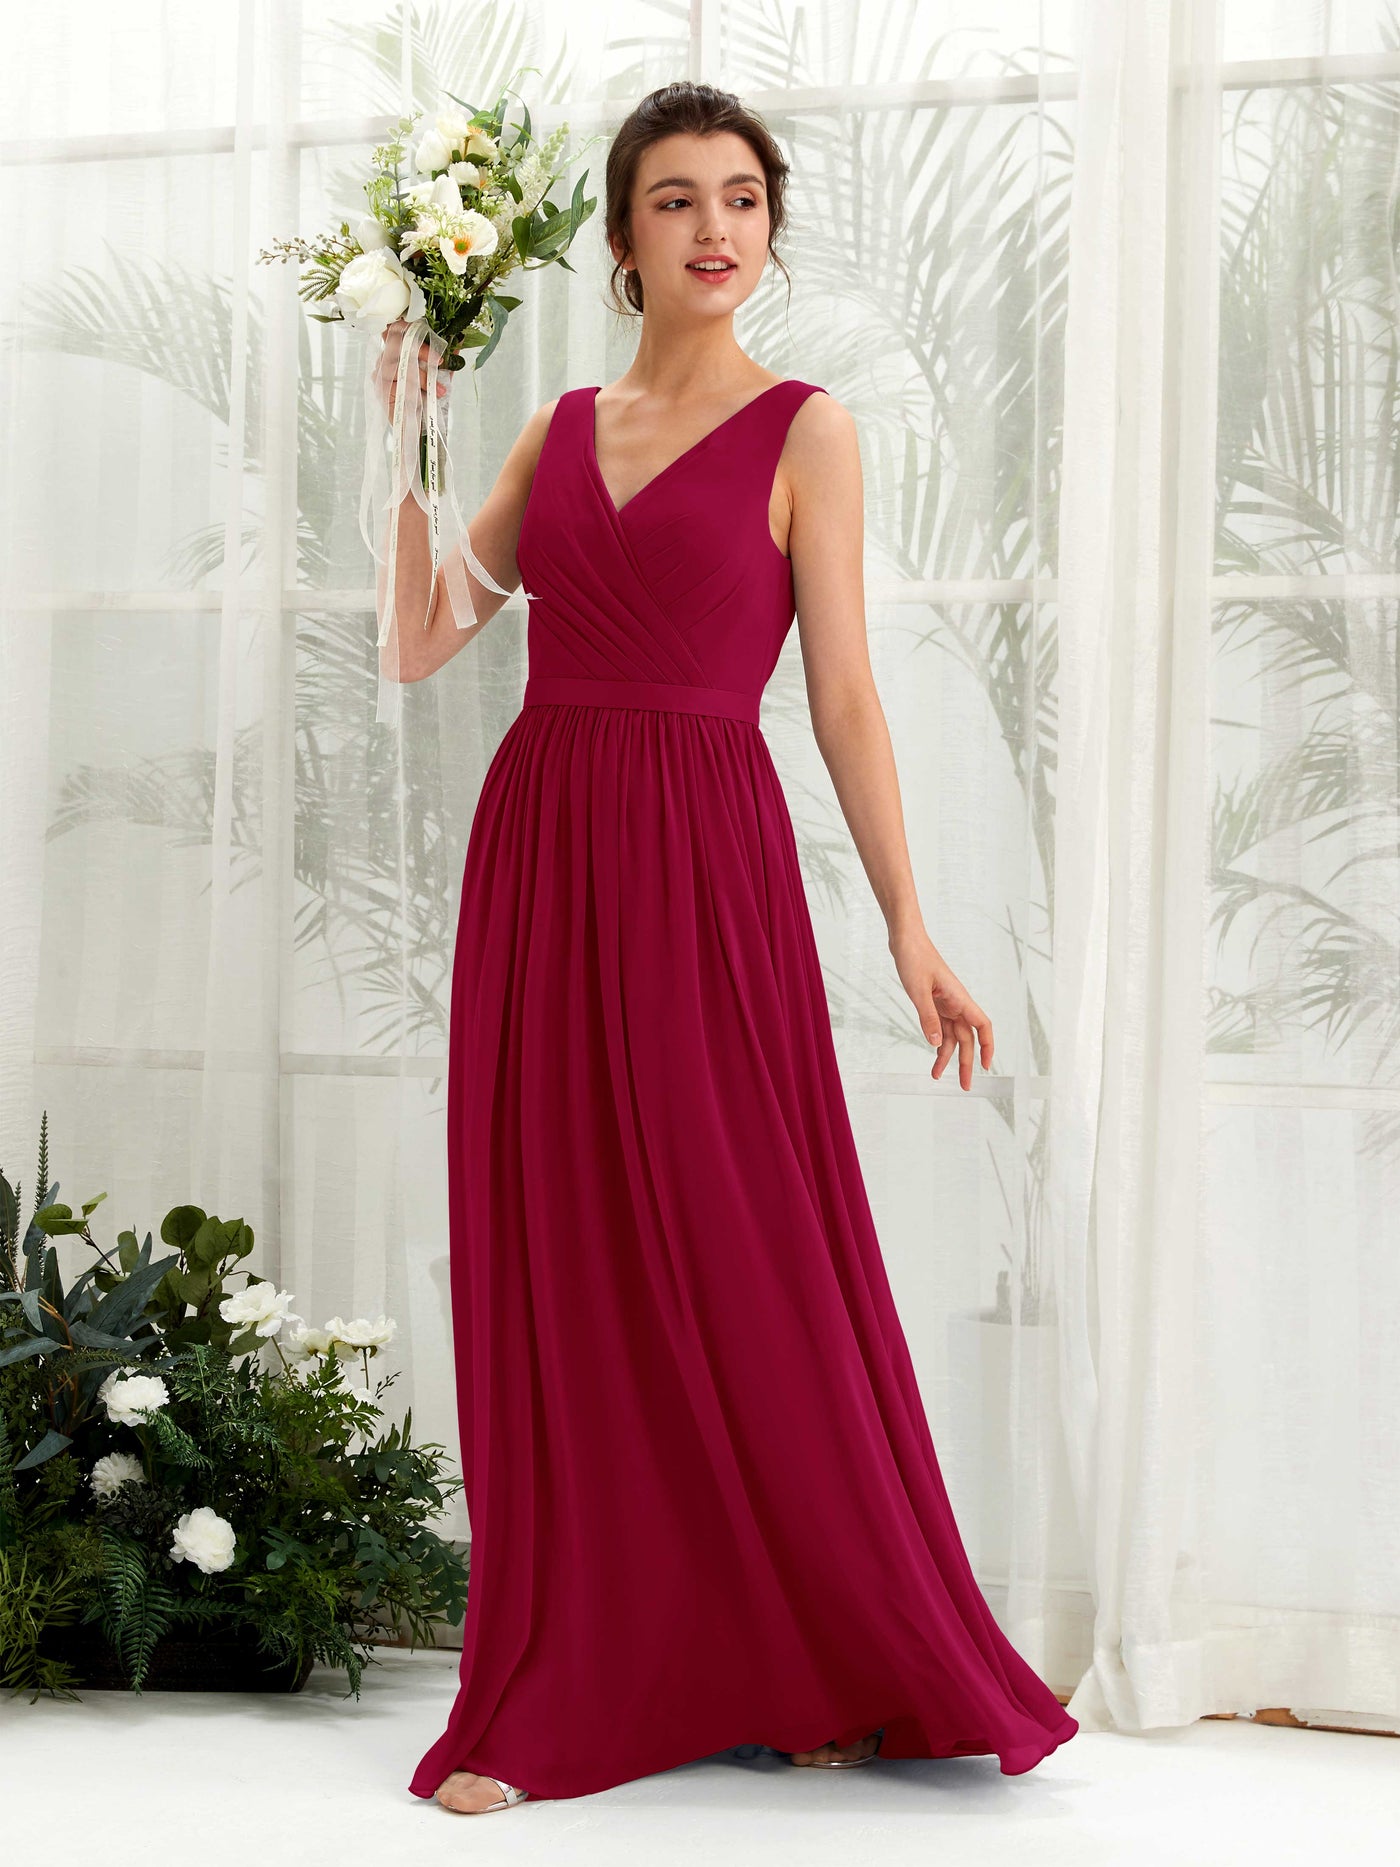 Jester Red Bridesmaid Dresses Bridesmaid Dress A-line Chiffon V-neck Full Length Sleeveless Wedding Party Dress (81223641)#color_jester-red